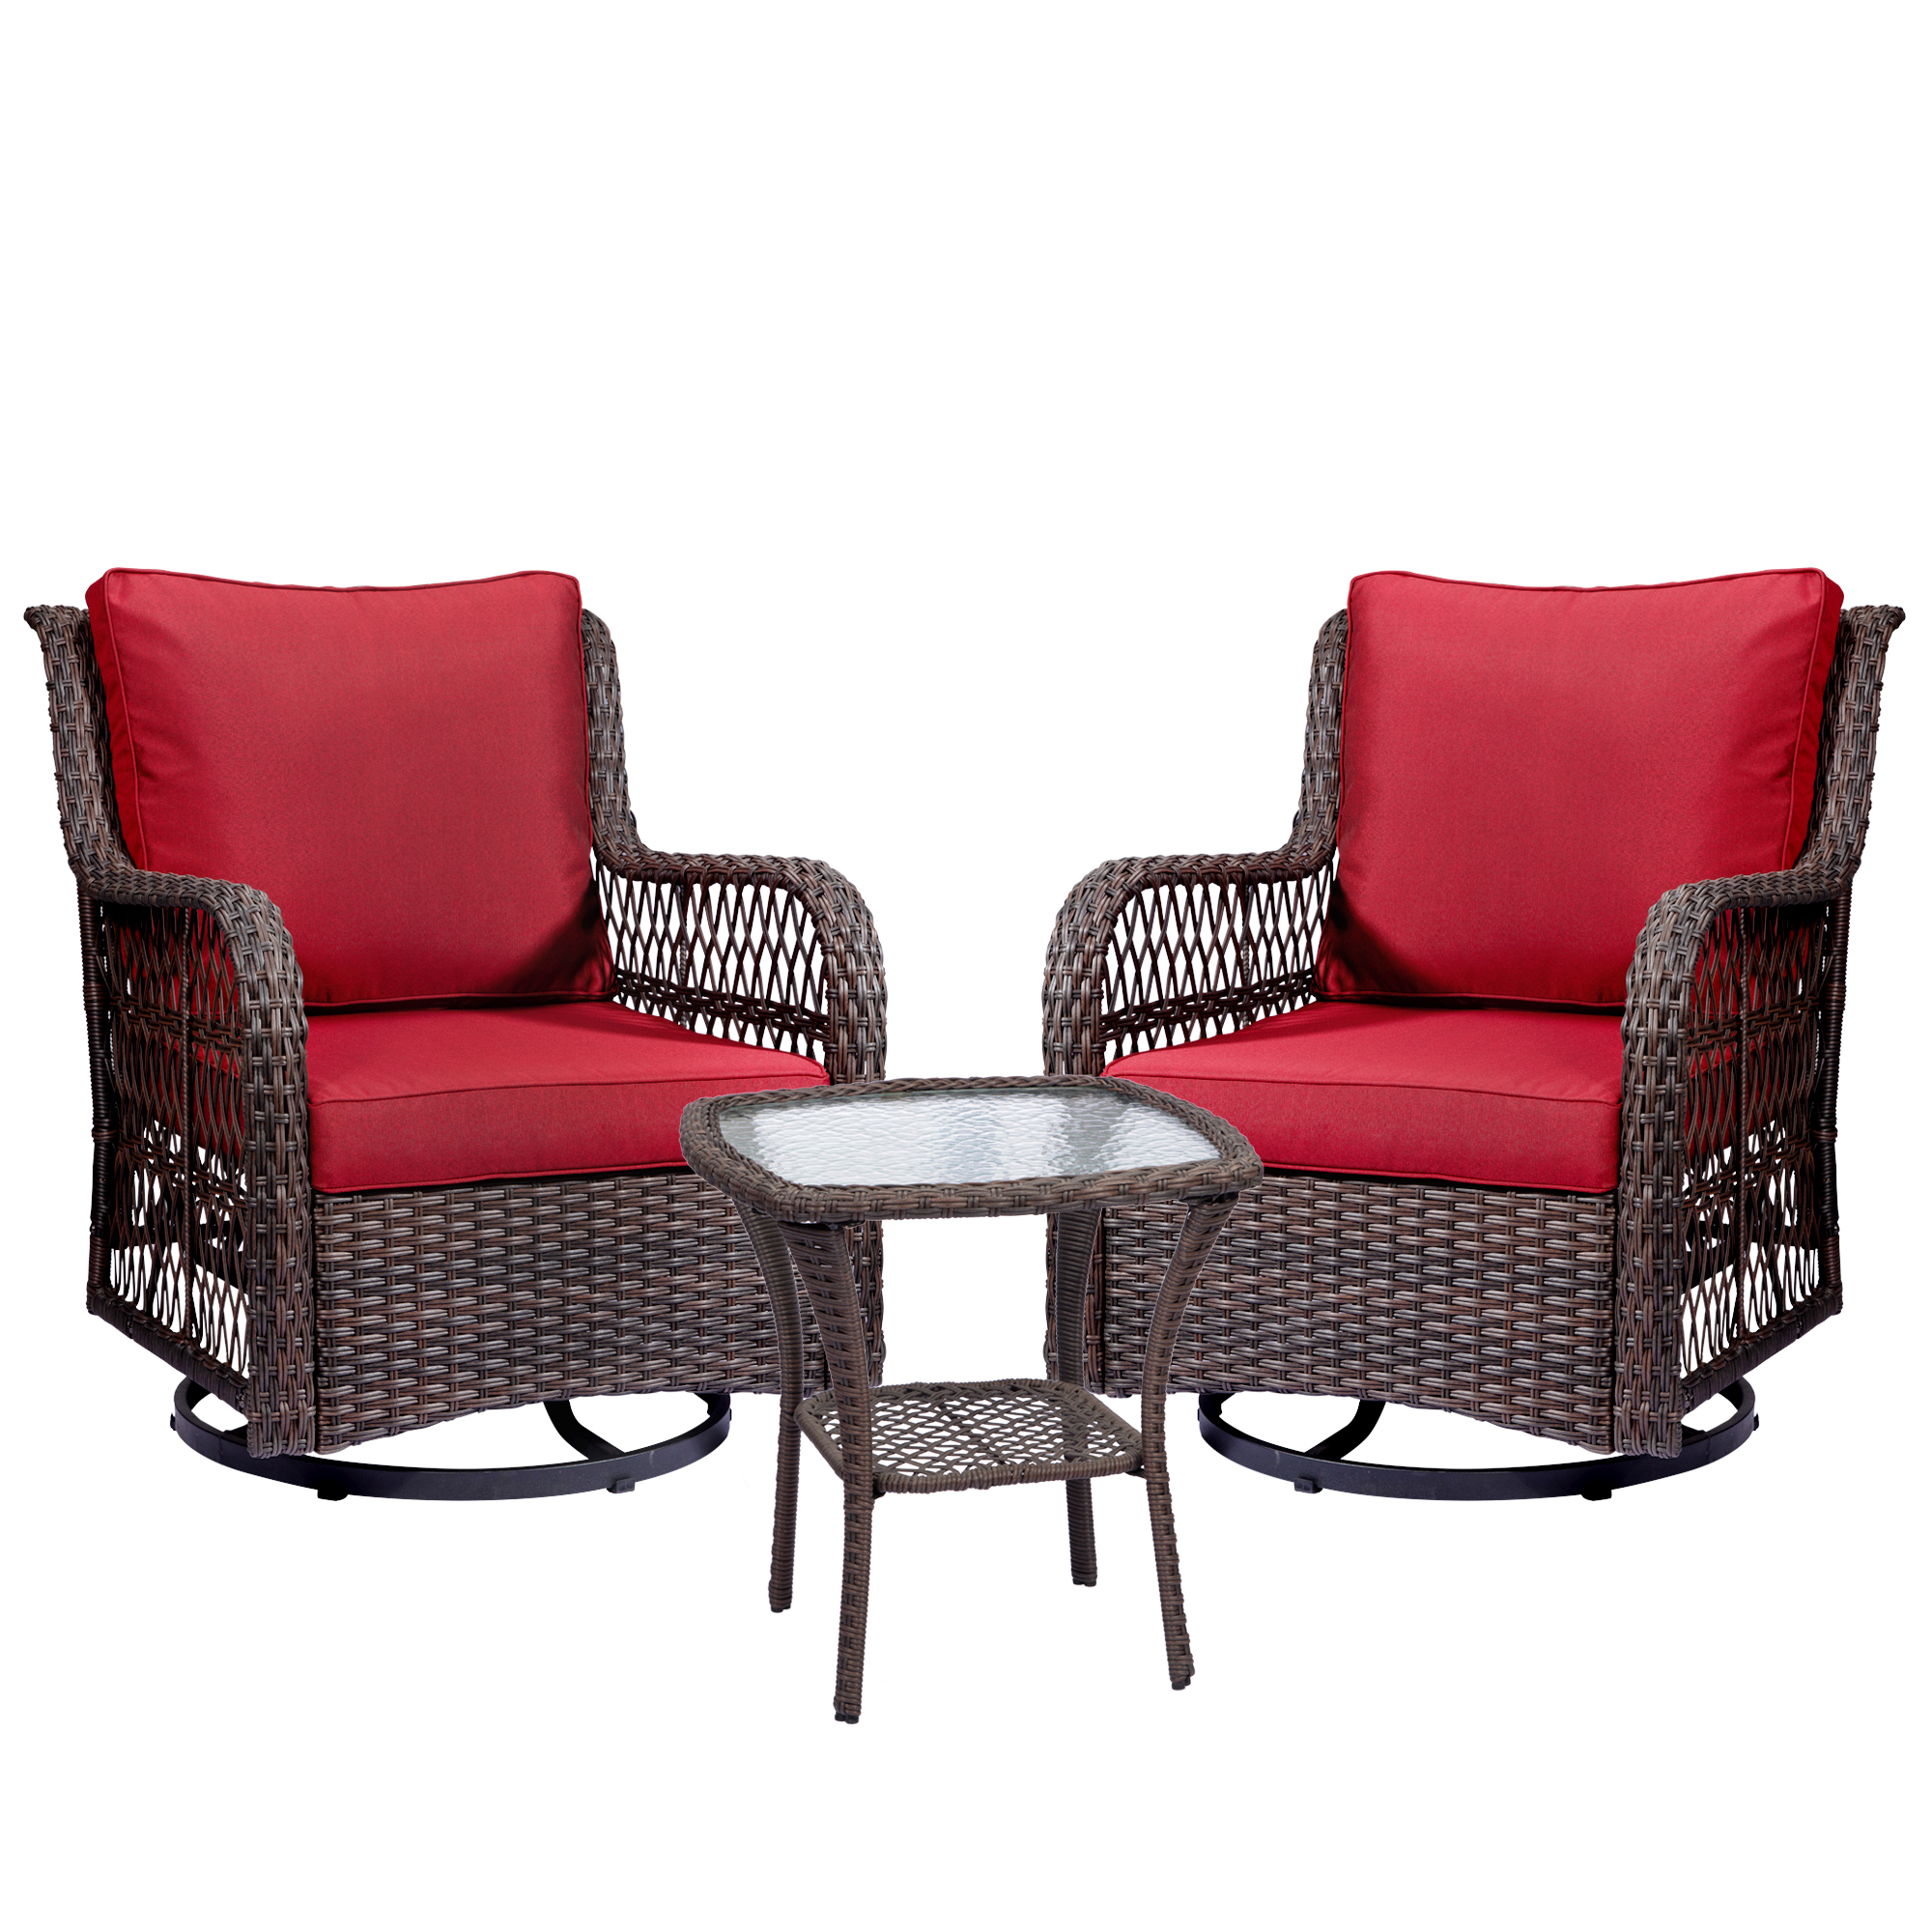 Leeten Rattan Swivel Chair Set of 2, 3-Pieces Outdoor Wicker Patio Bistro Set, Wicker Rocker Chair with Table and Cushion, Leisure Chair for Patio Garden - image 1 of 7